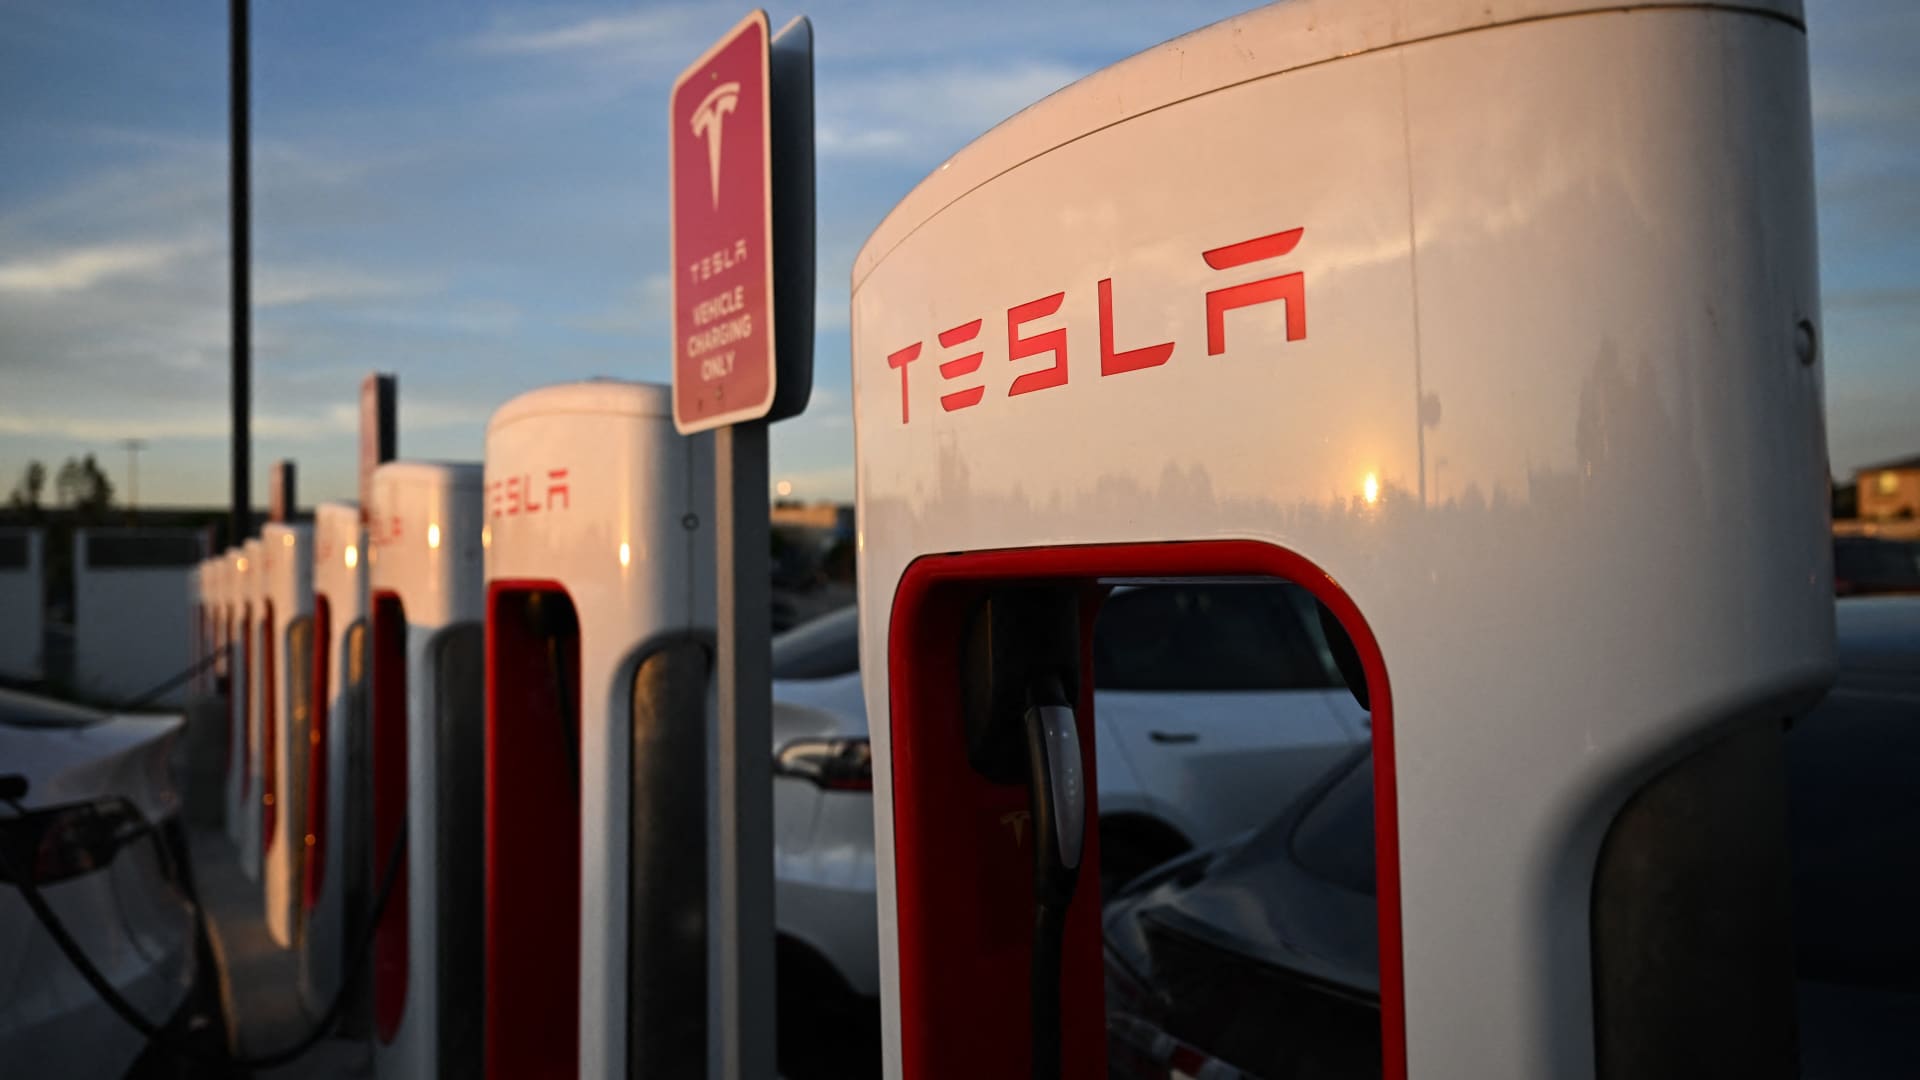 Tesla commits to open 7,500 chargers in the U.S. to other EVs